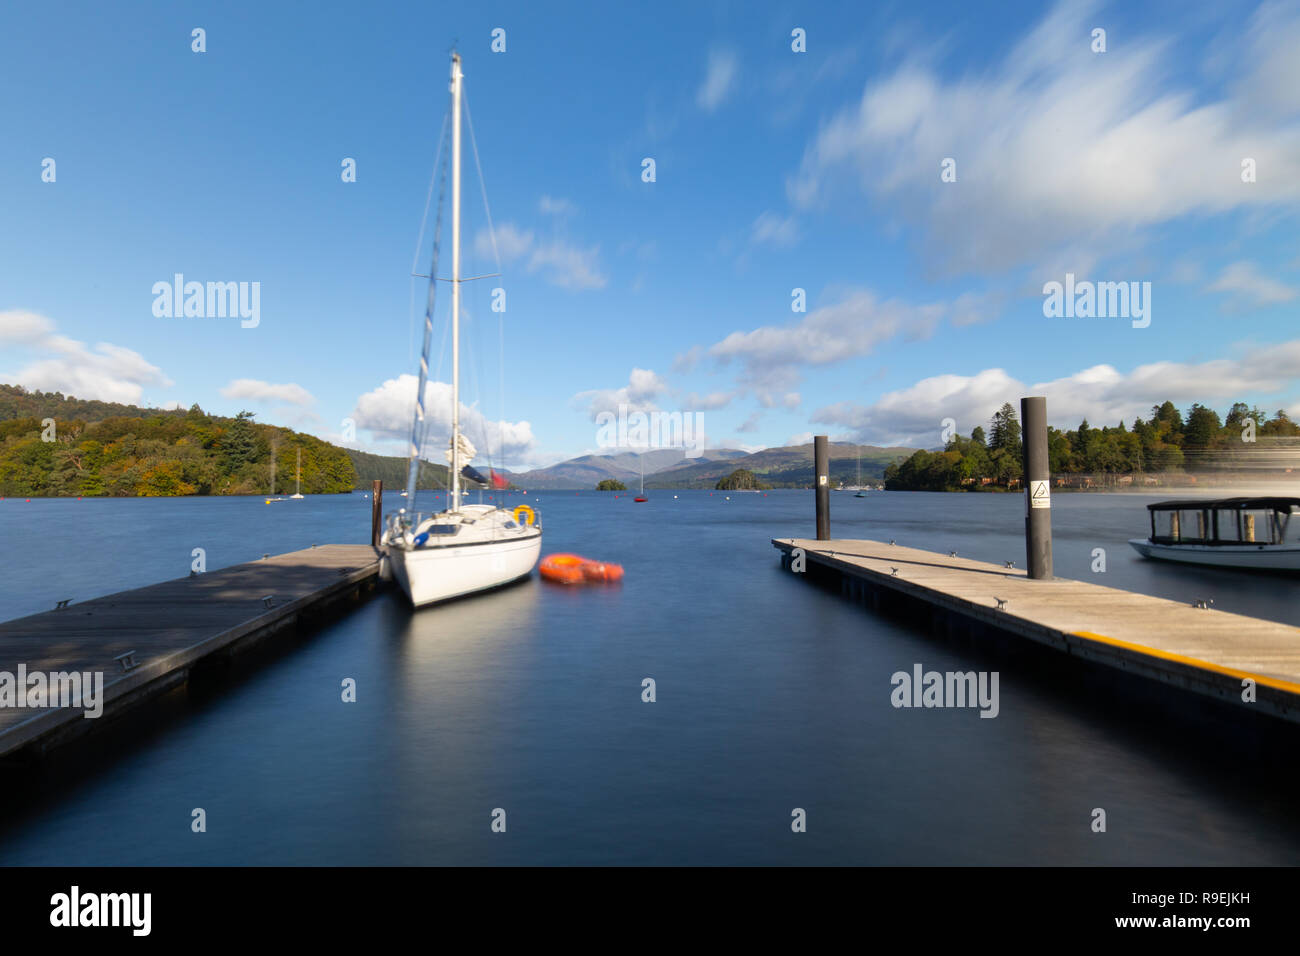 Sailboat docked to pier in Windermere, Lake District National Park, Cumbria, United Kingdom Stock Photo